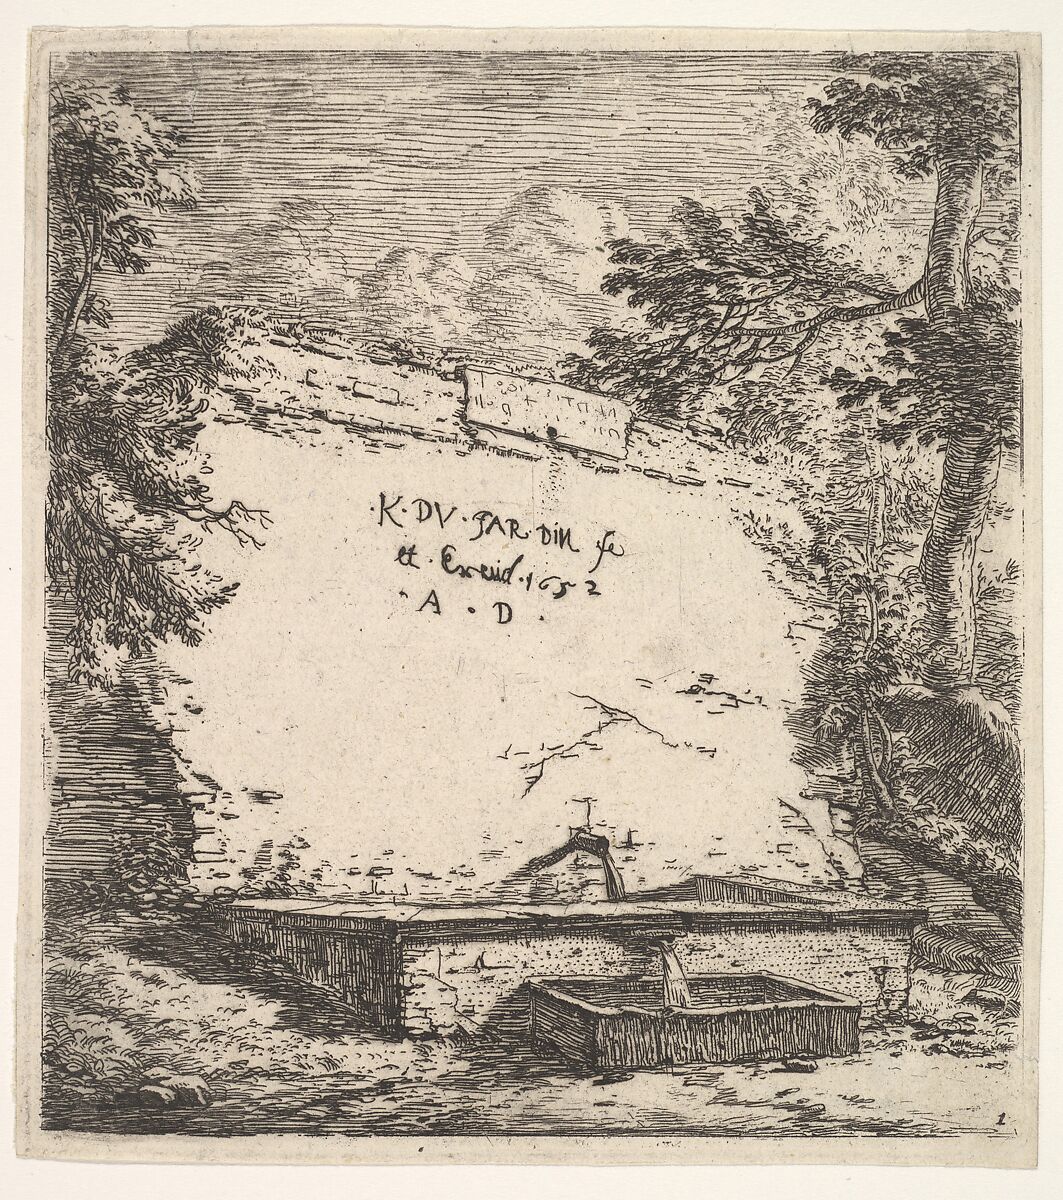 Frontispiece with stepped fountain; a stone wall with water spout pouring water into a rectilinear basin, from which a second spout pours water into a smaller rectilinear basin, flanked by tree branches, Karel Dujardin (Dutch, Amsterdam 1622–1678 Venice), Etching 